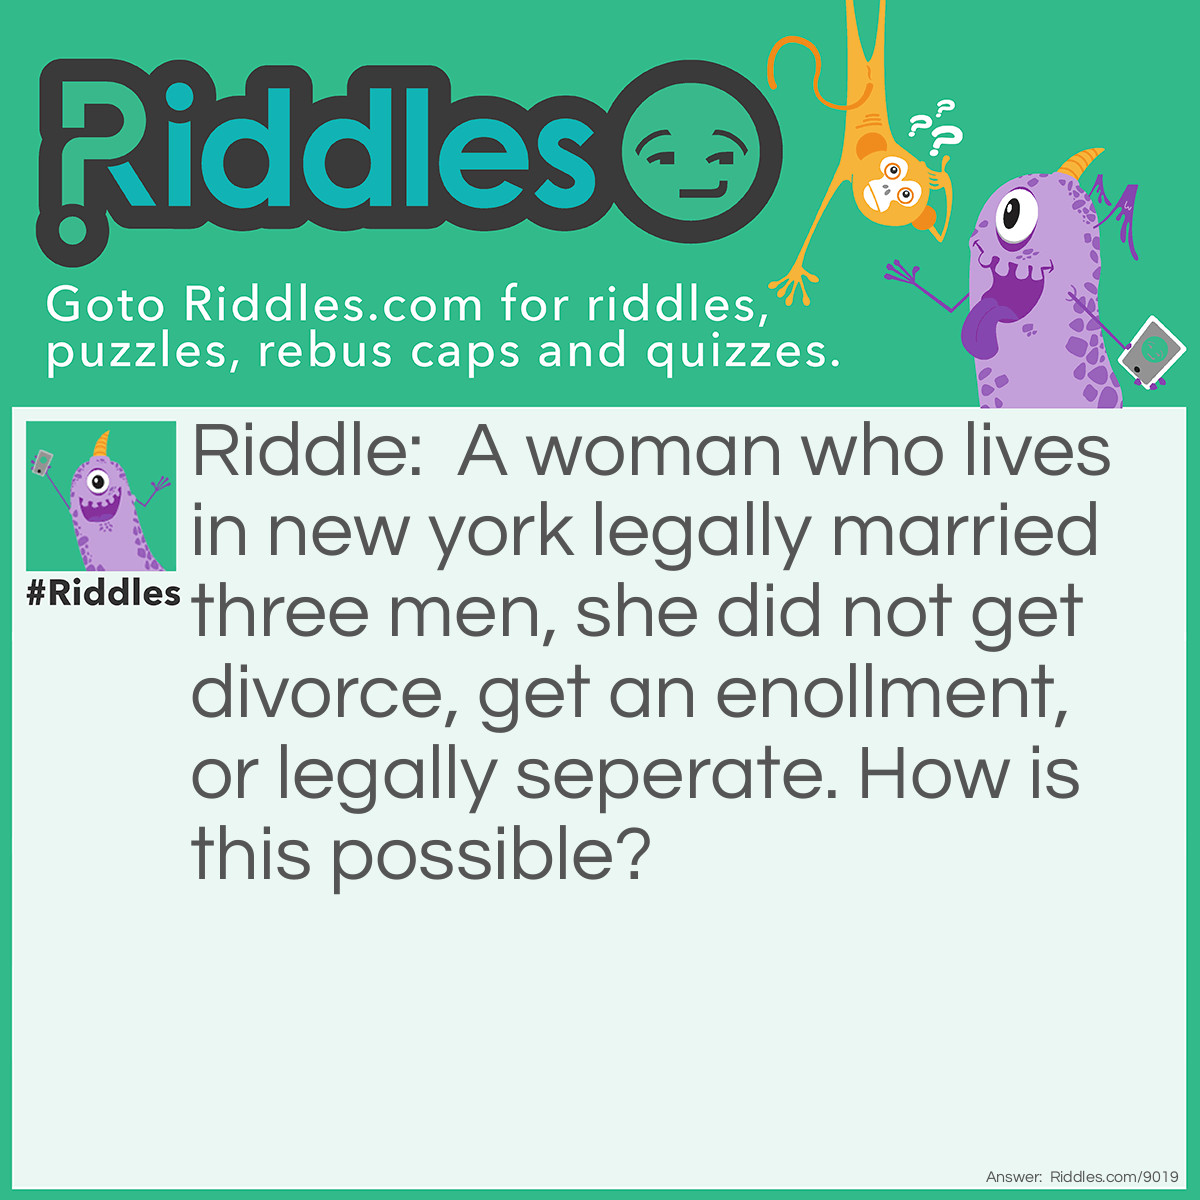 Riddle: A woman who lives in new york legally married three men, she did not get divorce, get an enollment, or legally seperate. How is this possible? Answer: Poligamy.